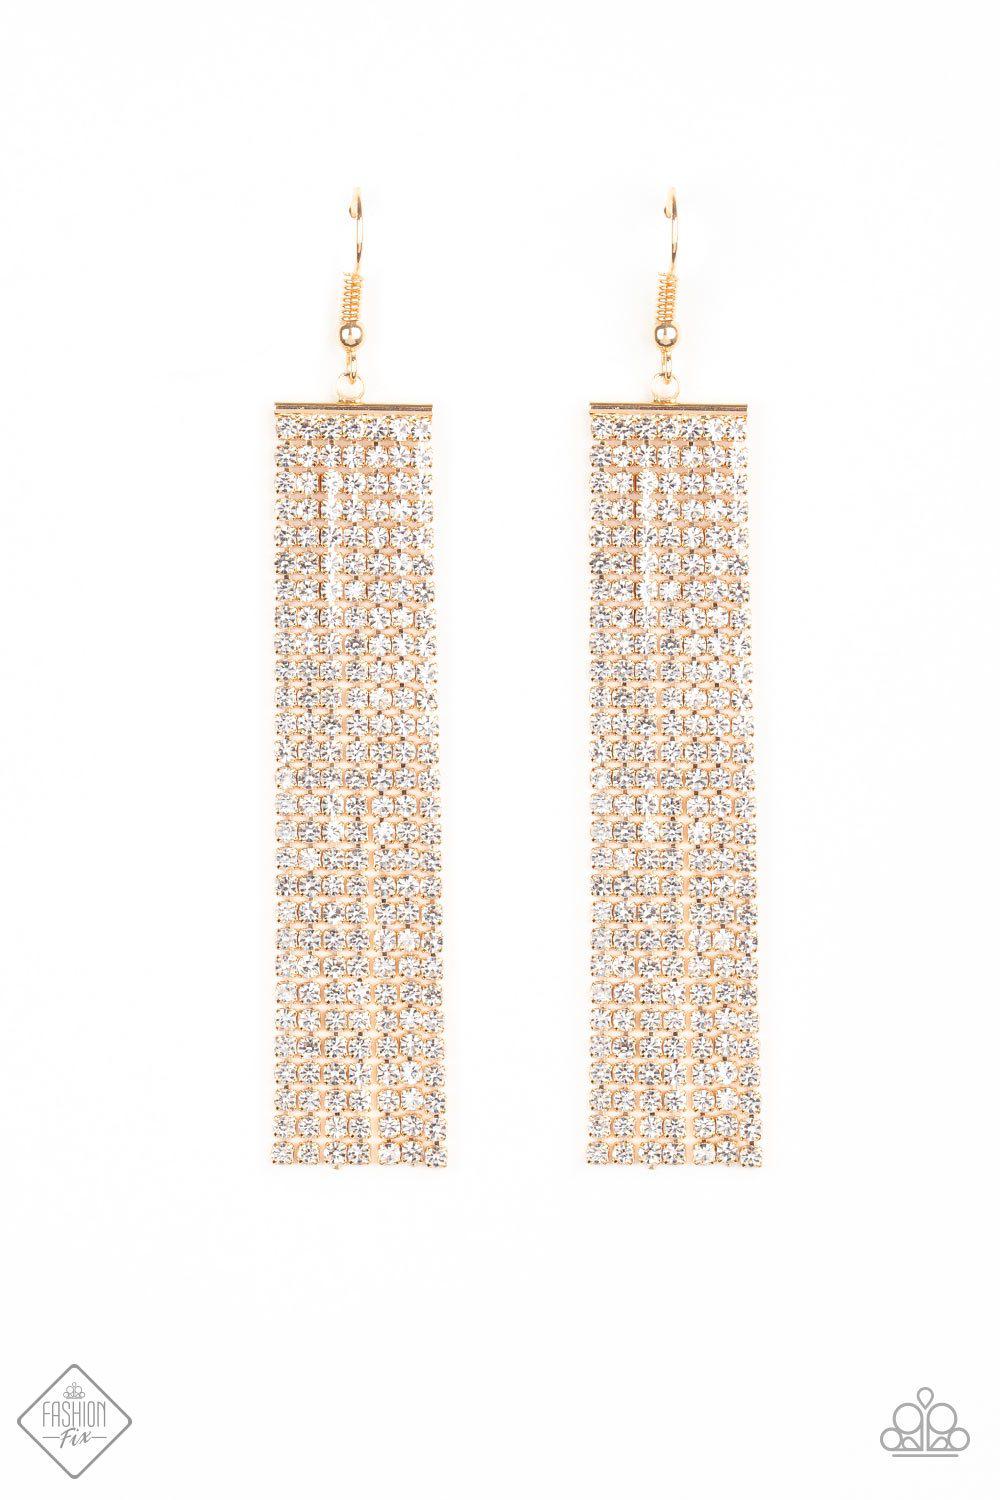 Top-Down Shimmer Gold and White Rhinestone Earrings - Paparazzi Accessories-CarasShop.com - $5 Jewelry by Cara Jewels